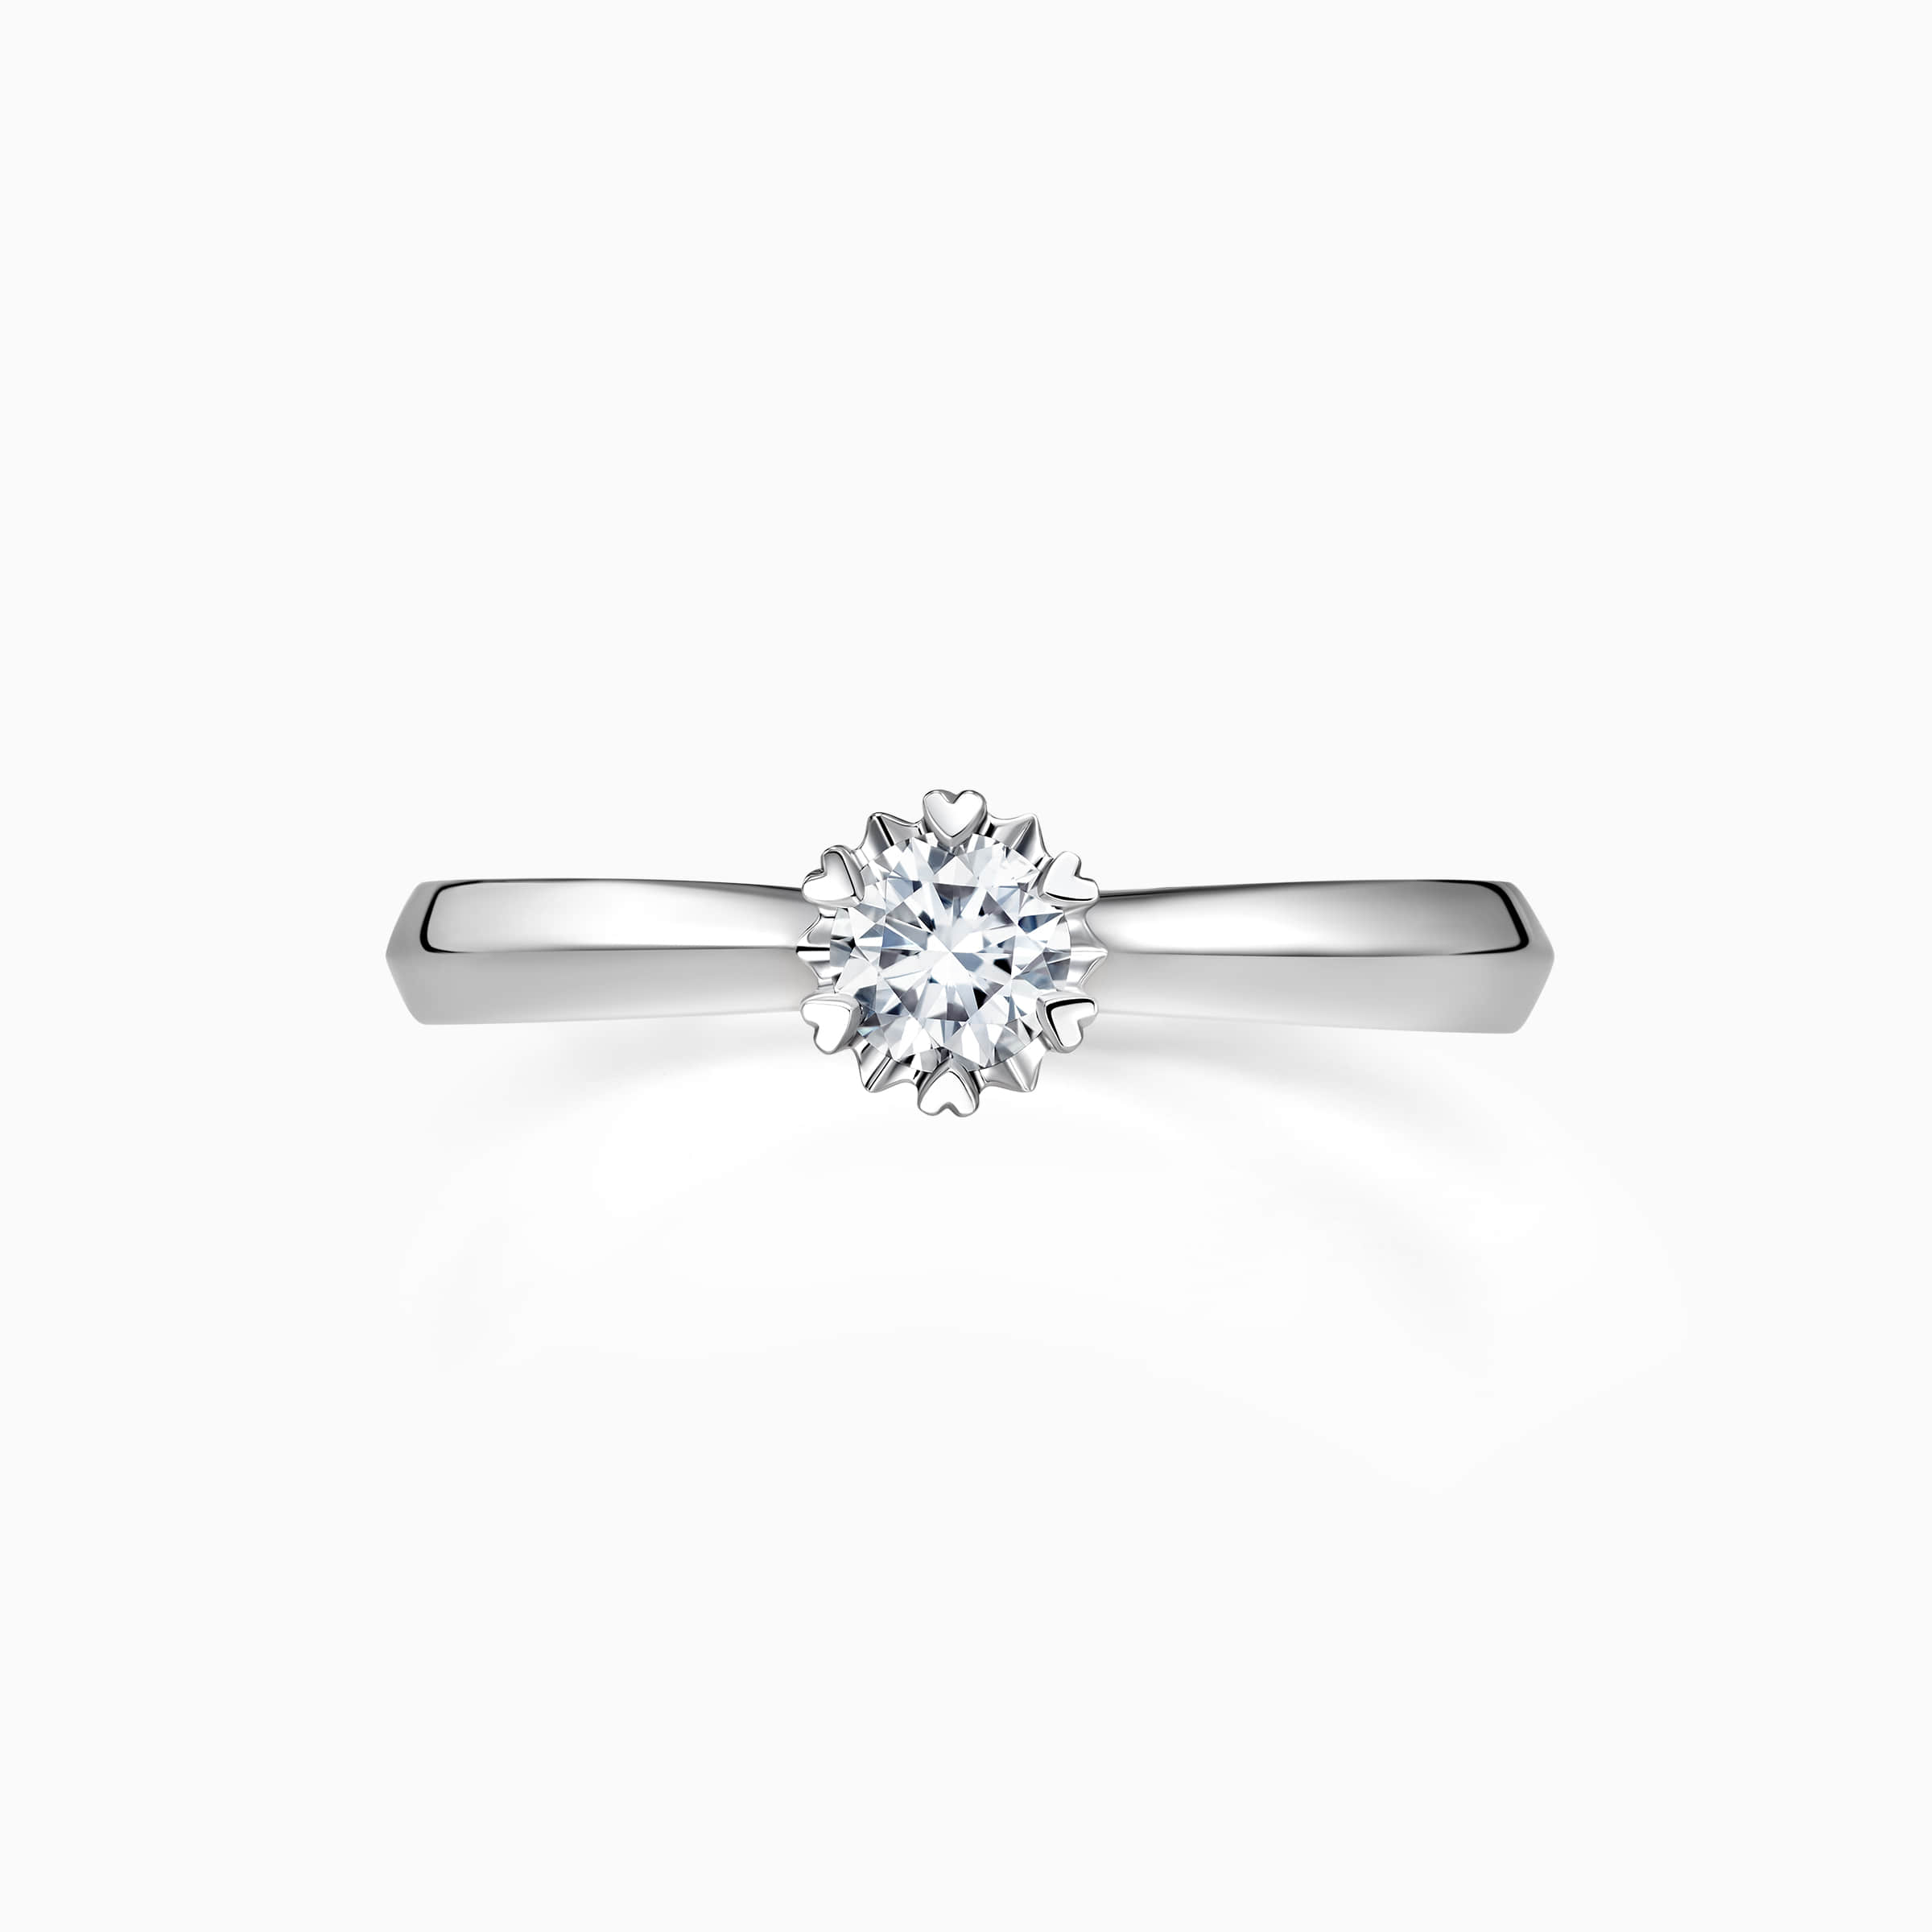 Darry Ring snowflake diamond promise ring top view